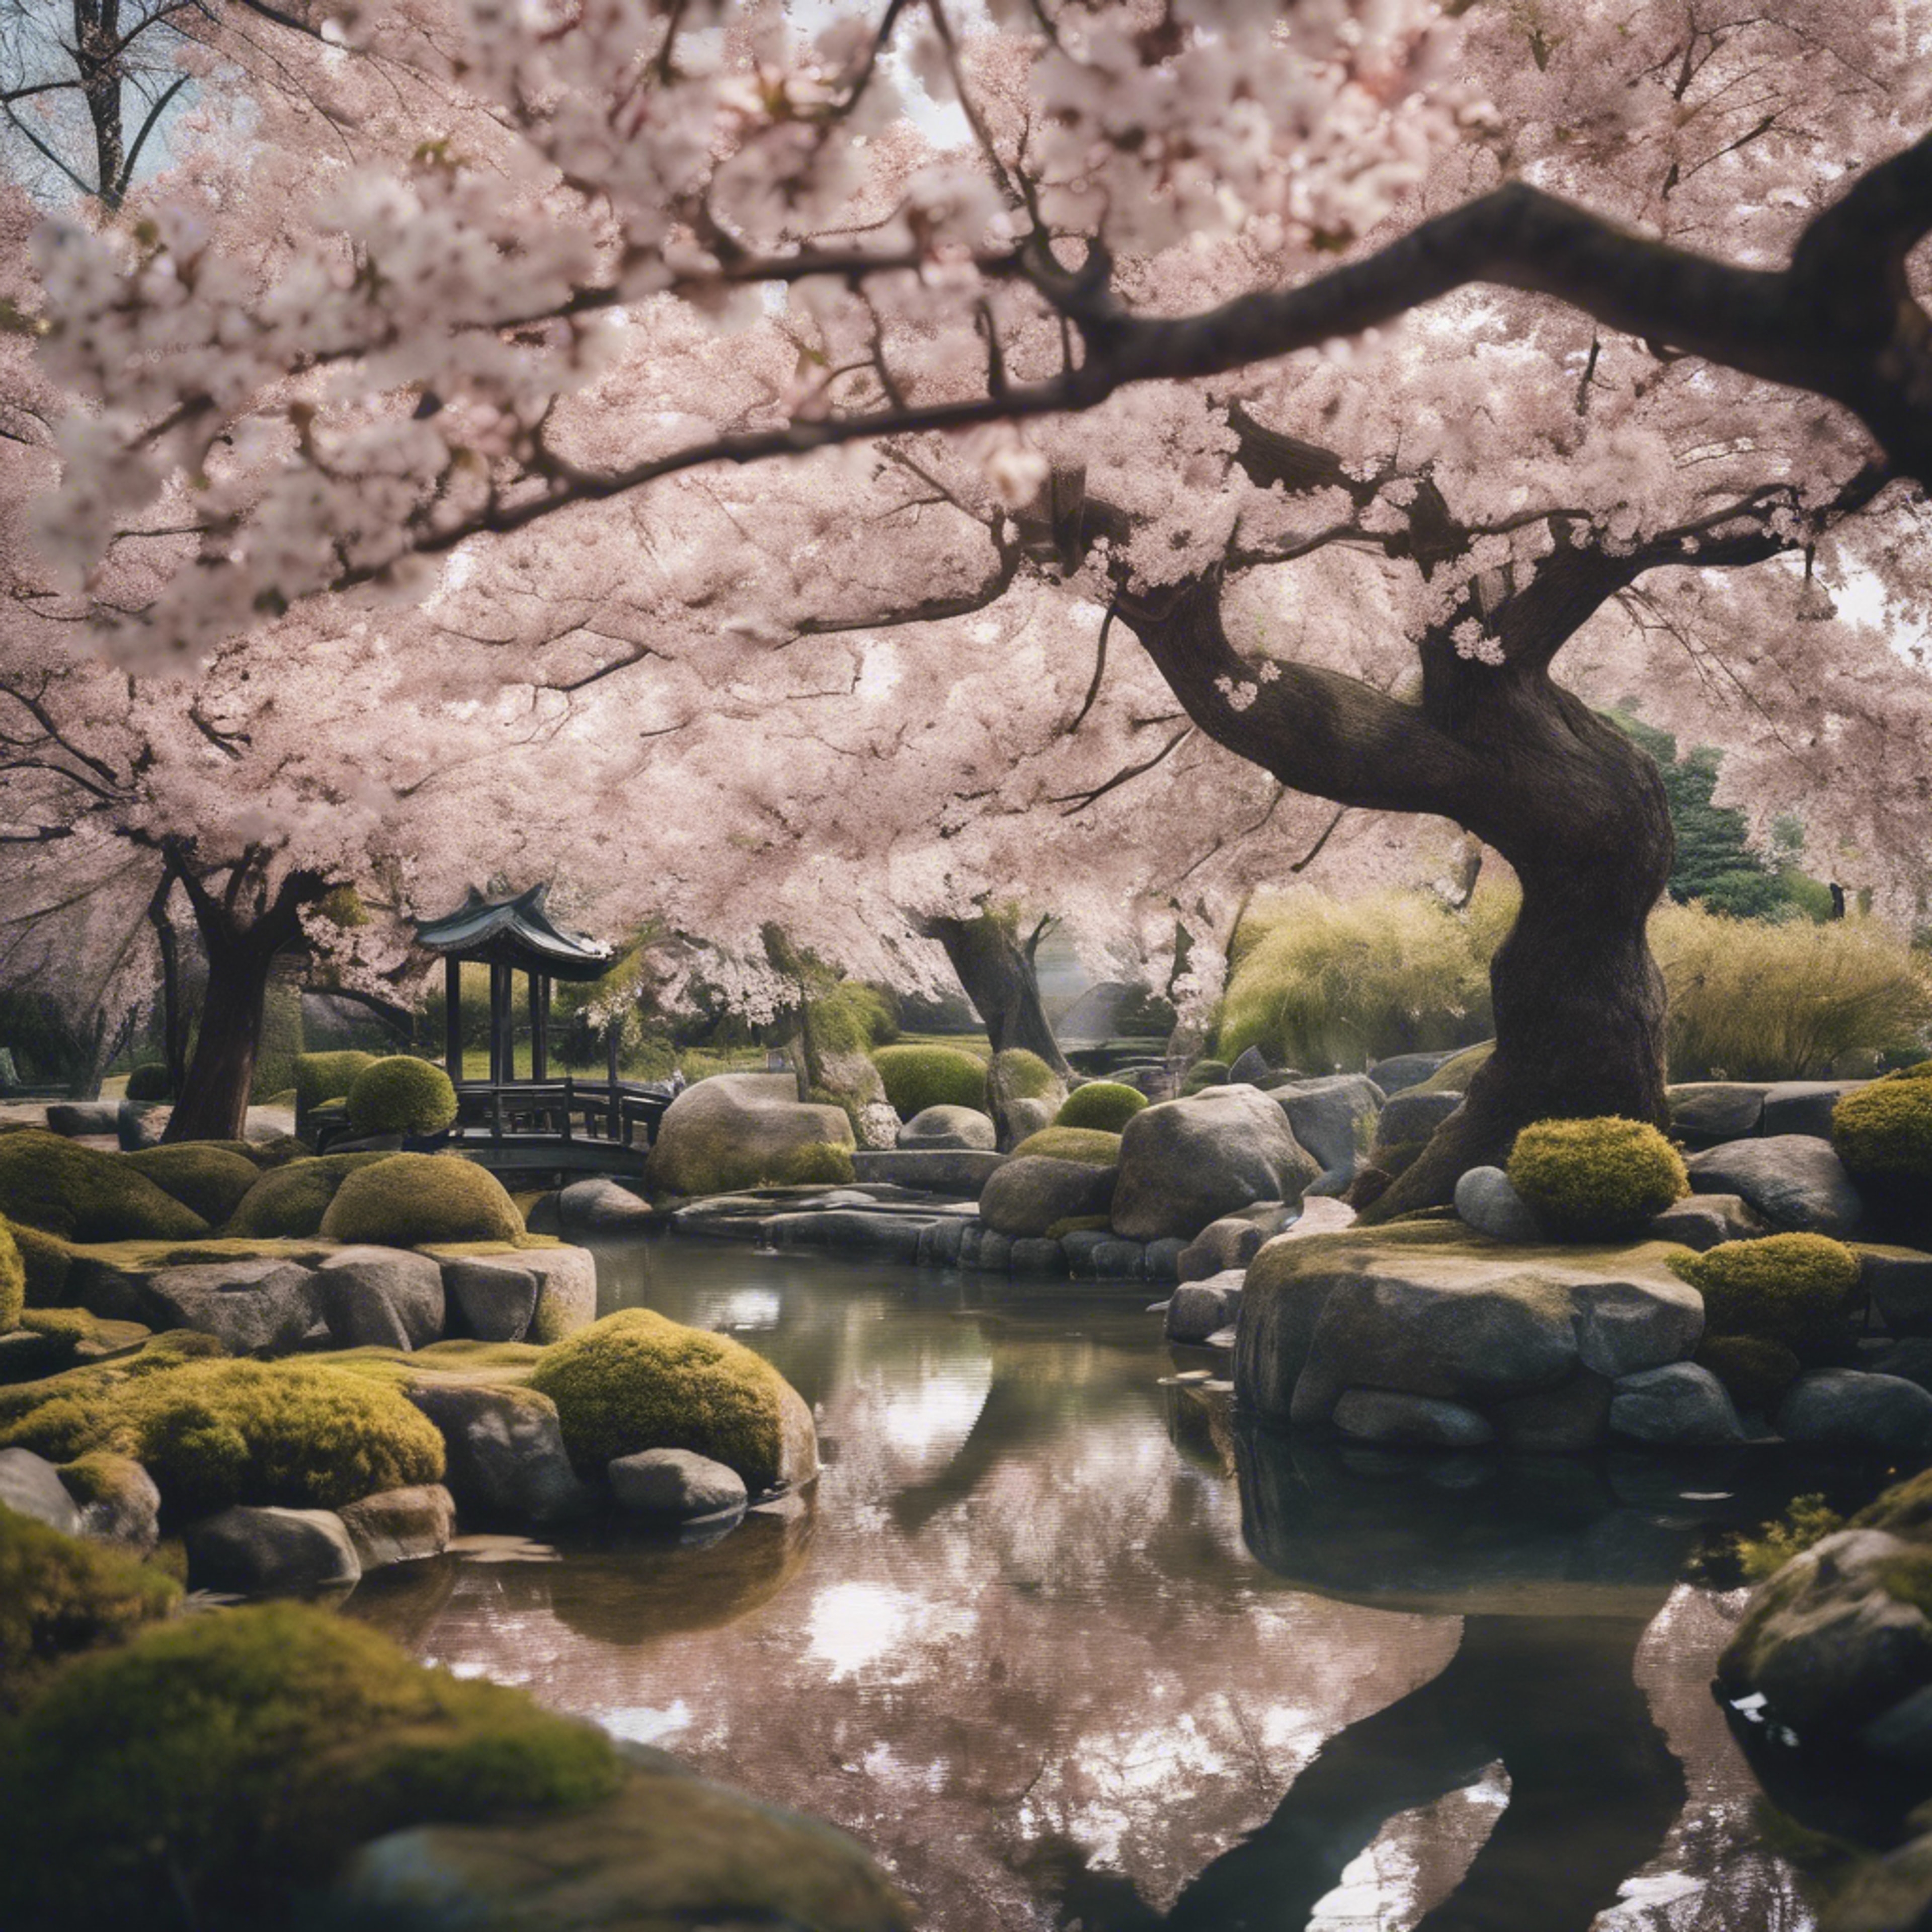 A wide-angle view of a serene Japanese garden with cherry blossoms in full bloom. Валлпапер[cf6d4e9694a4479cb5ff]